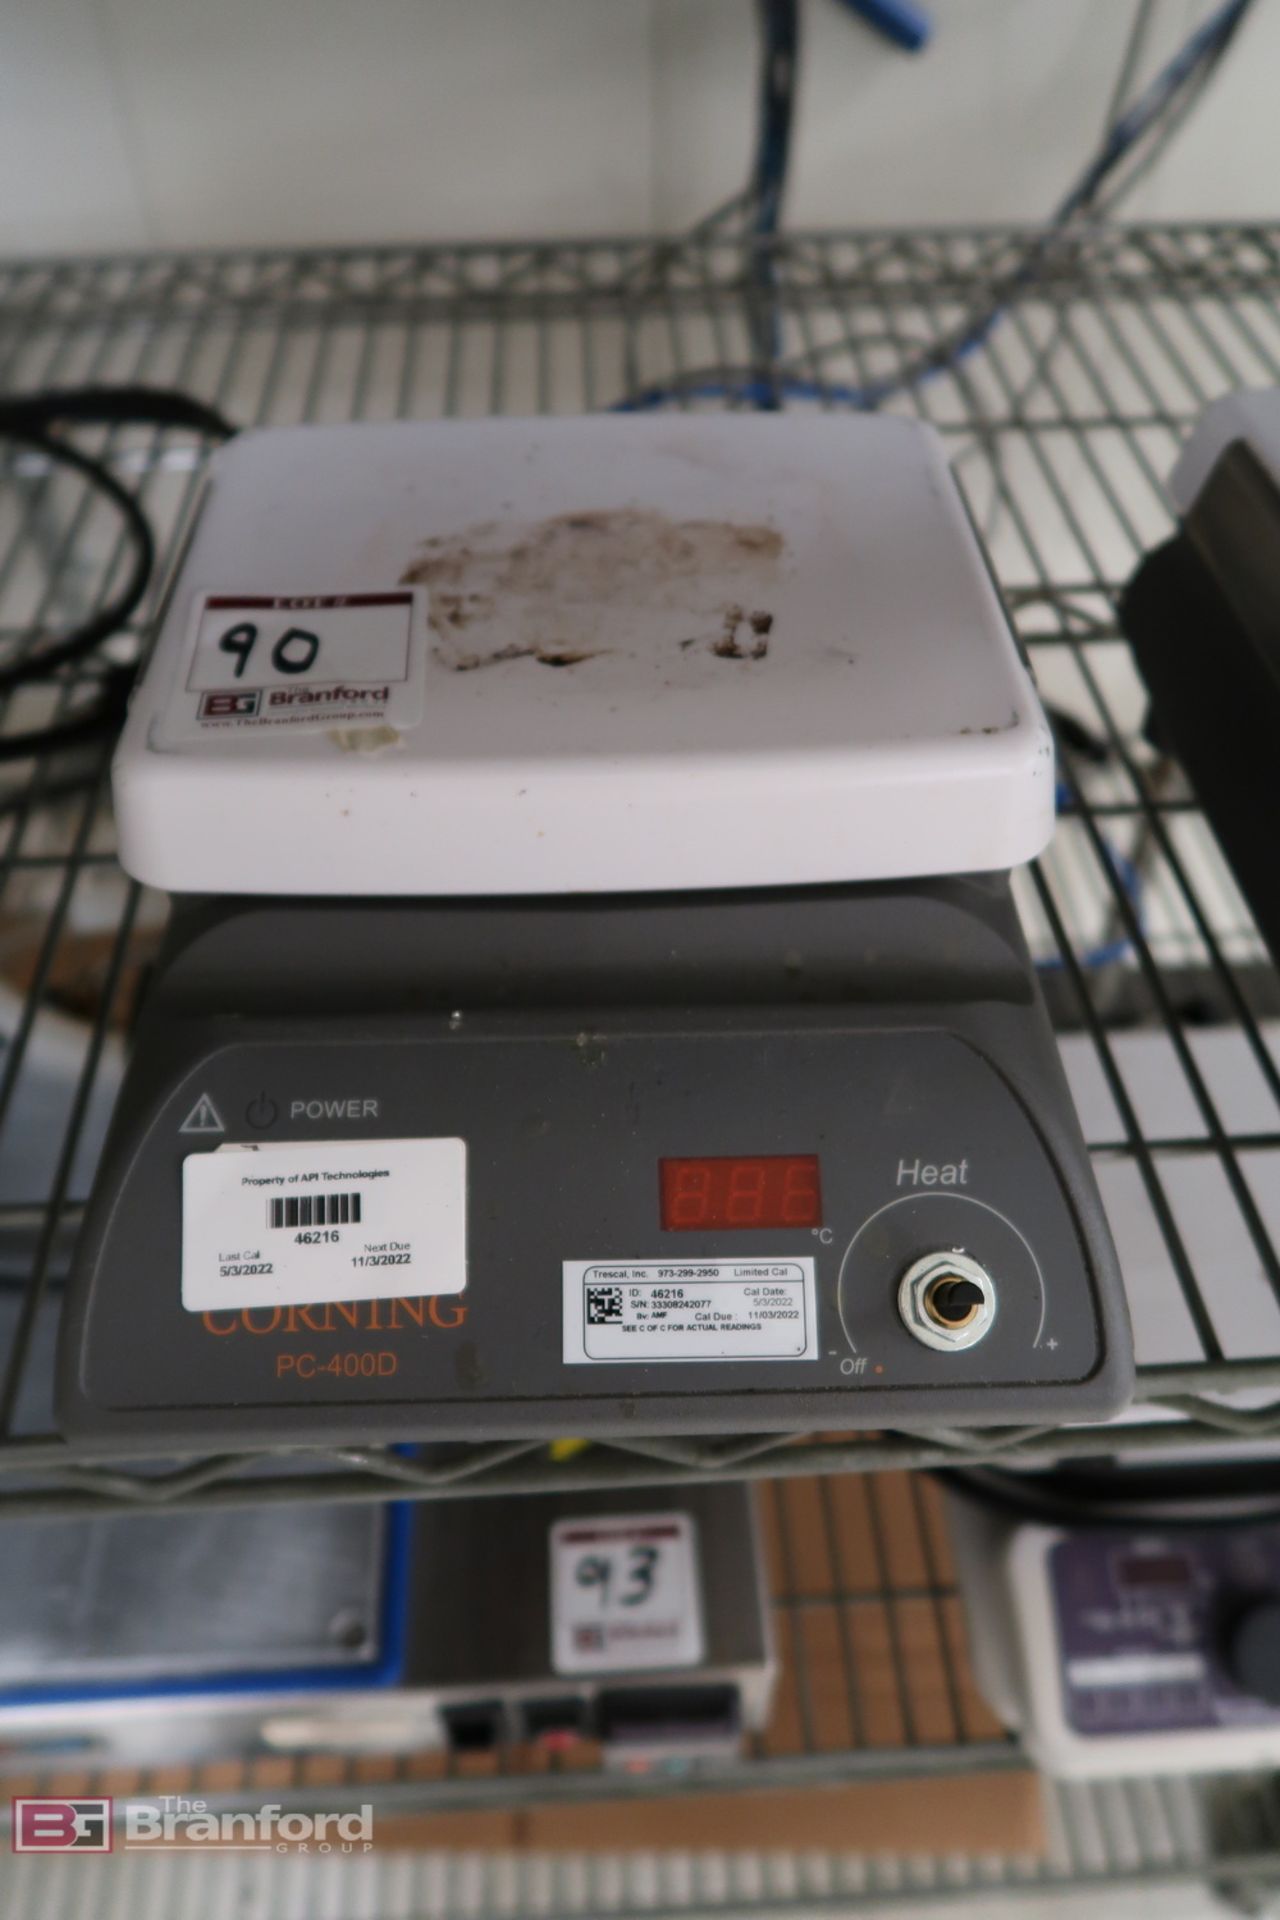 Corning PC-400D hot plate